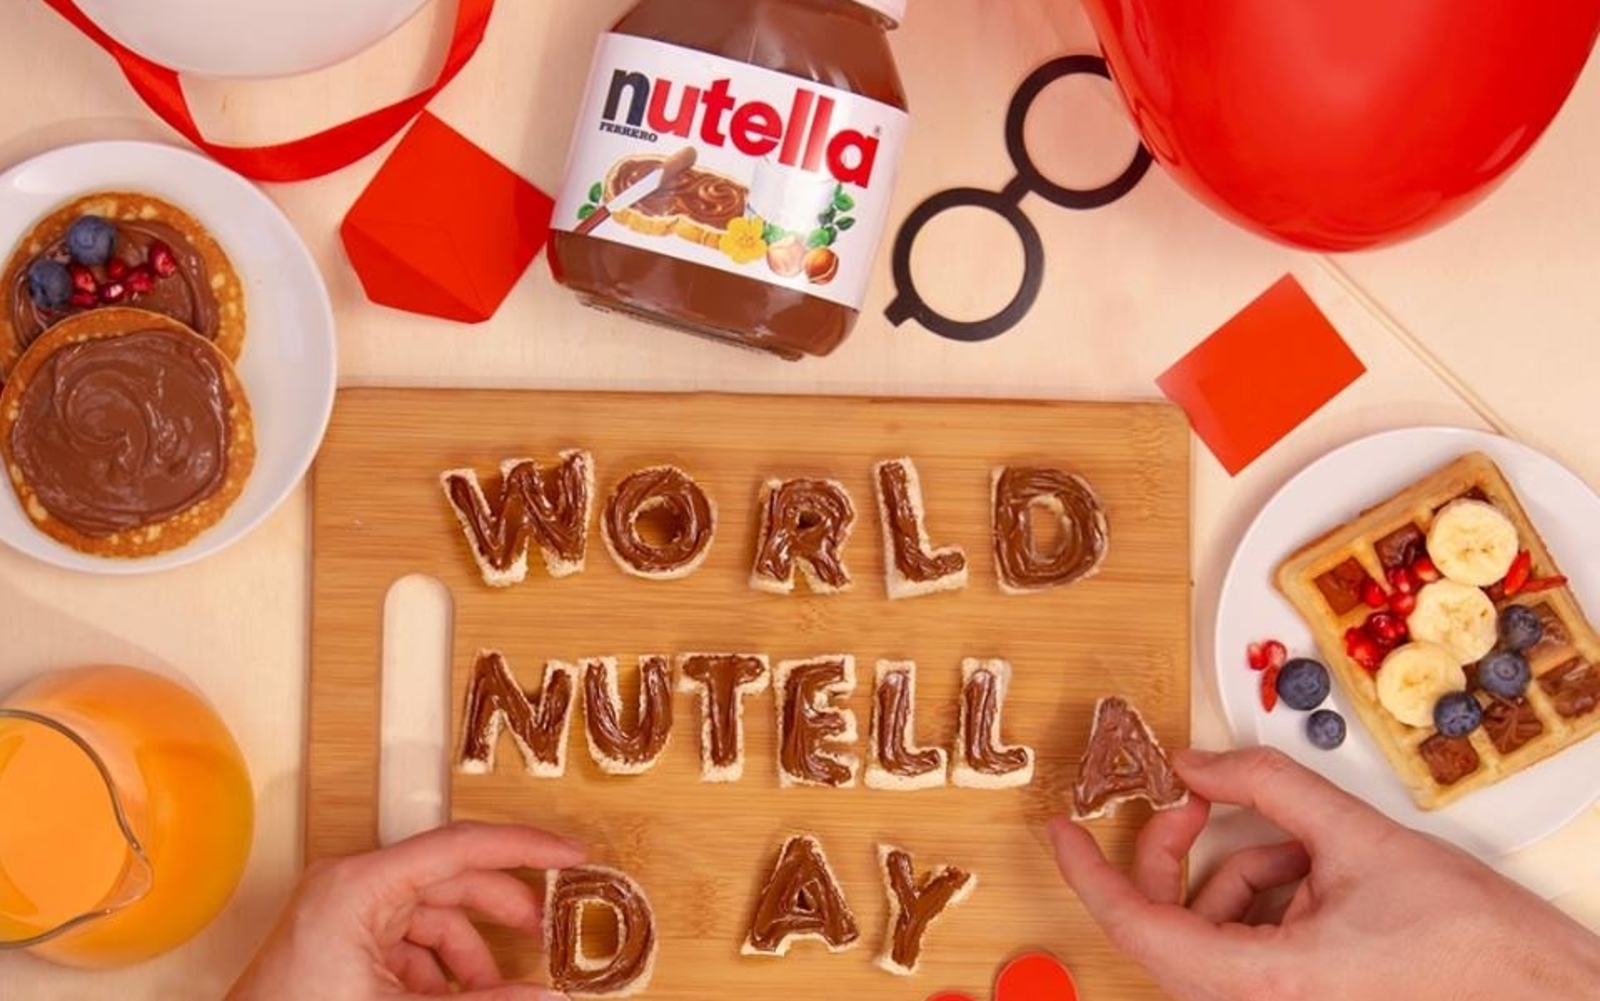 Today is World Nutella Day